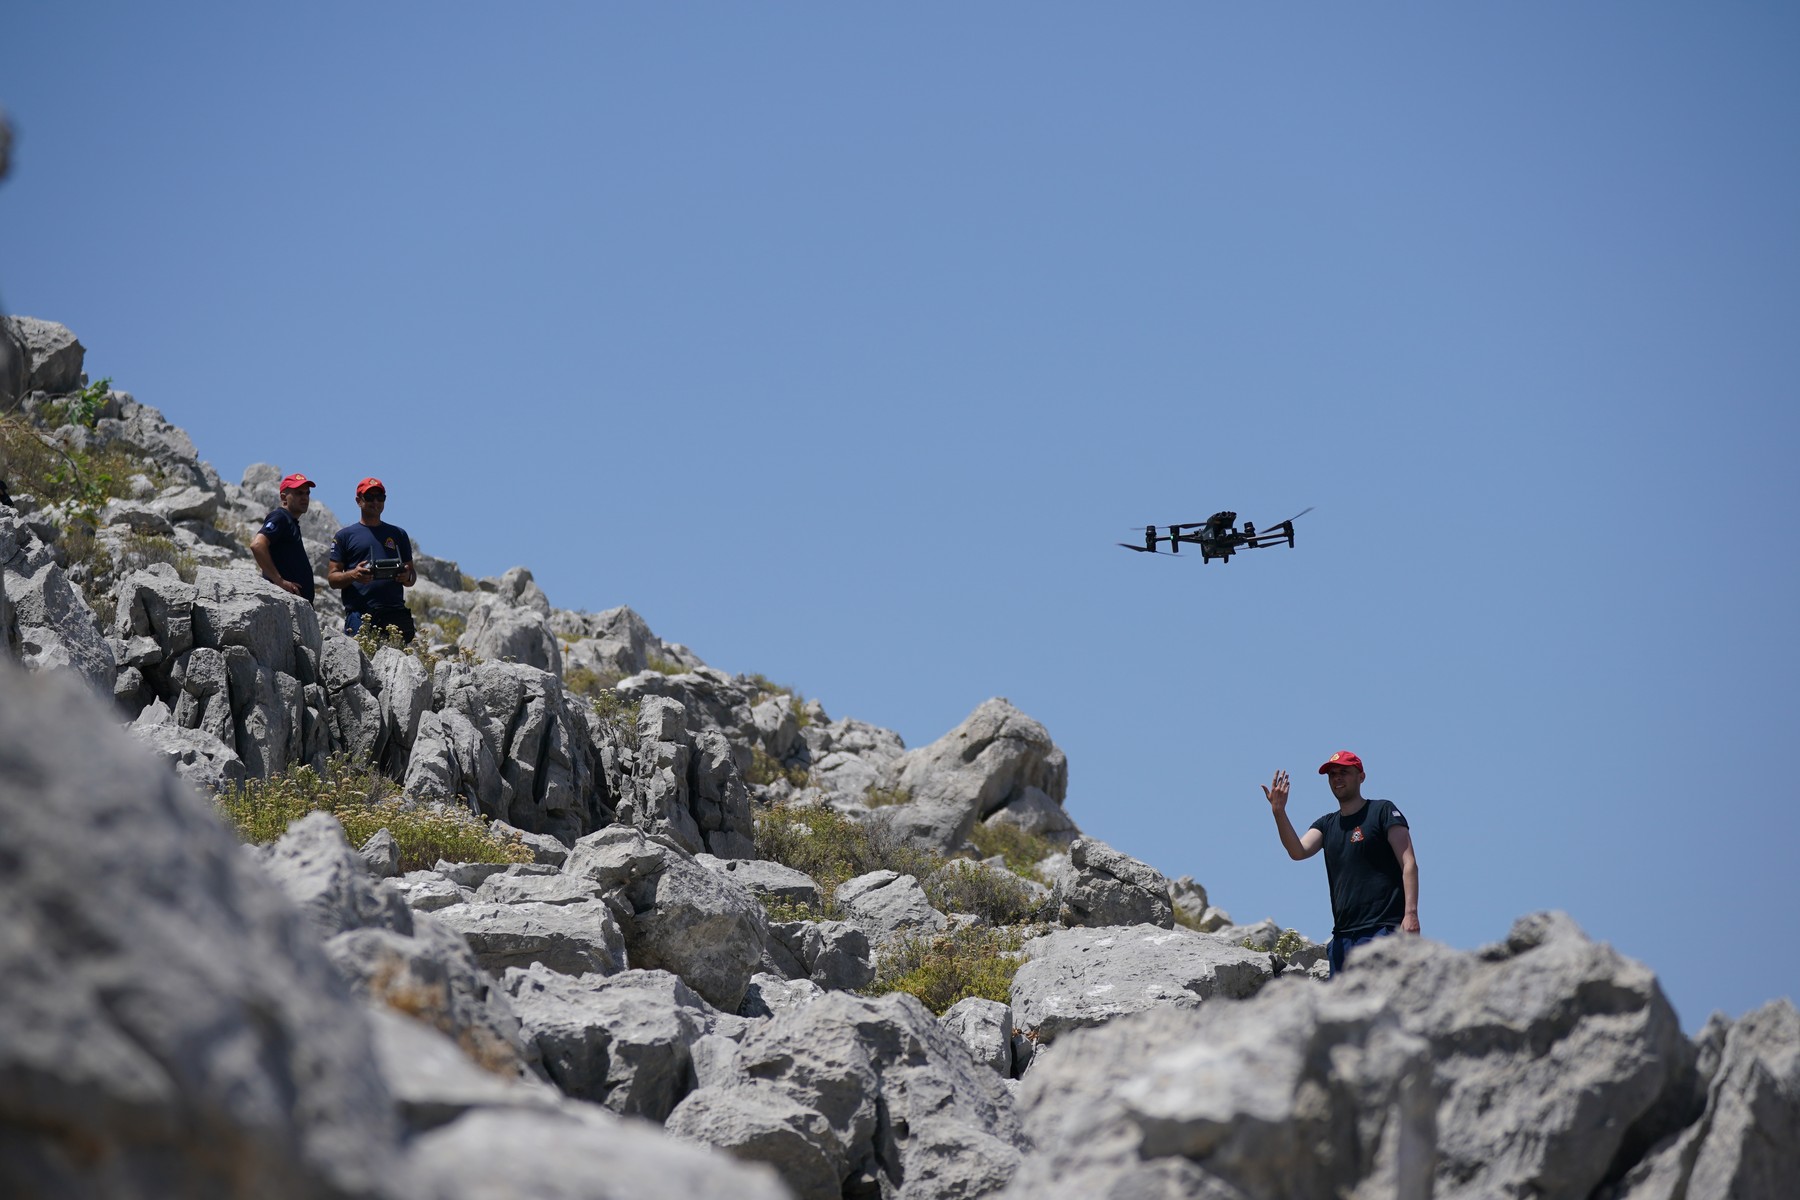 A member of the search team flying a drone in Symi, Greece, where a search and rescue operation is under way for TV doctor and columnist Michael Mosley, after he went missing while on holiday. Police and firefighters have been using drones to scour the island, which is part of the Dodecanese island chain and is about 25 miles north of Rhodes. Picture date: Saturday June 8, 2024.,Image: 879905234, License: Rights-managed, Restrictions: , Model Release: no, Credit line: Yui Mok / PA Images / Profimedia